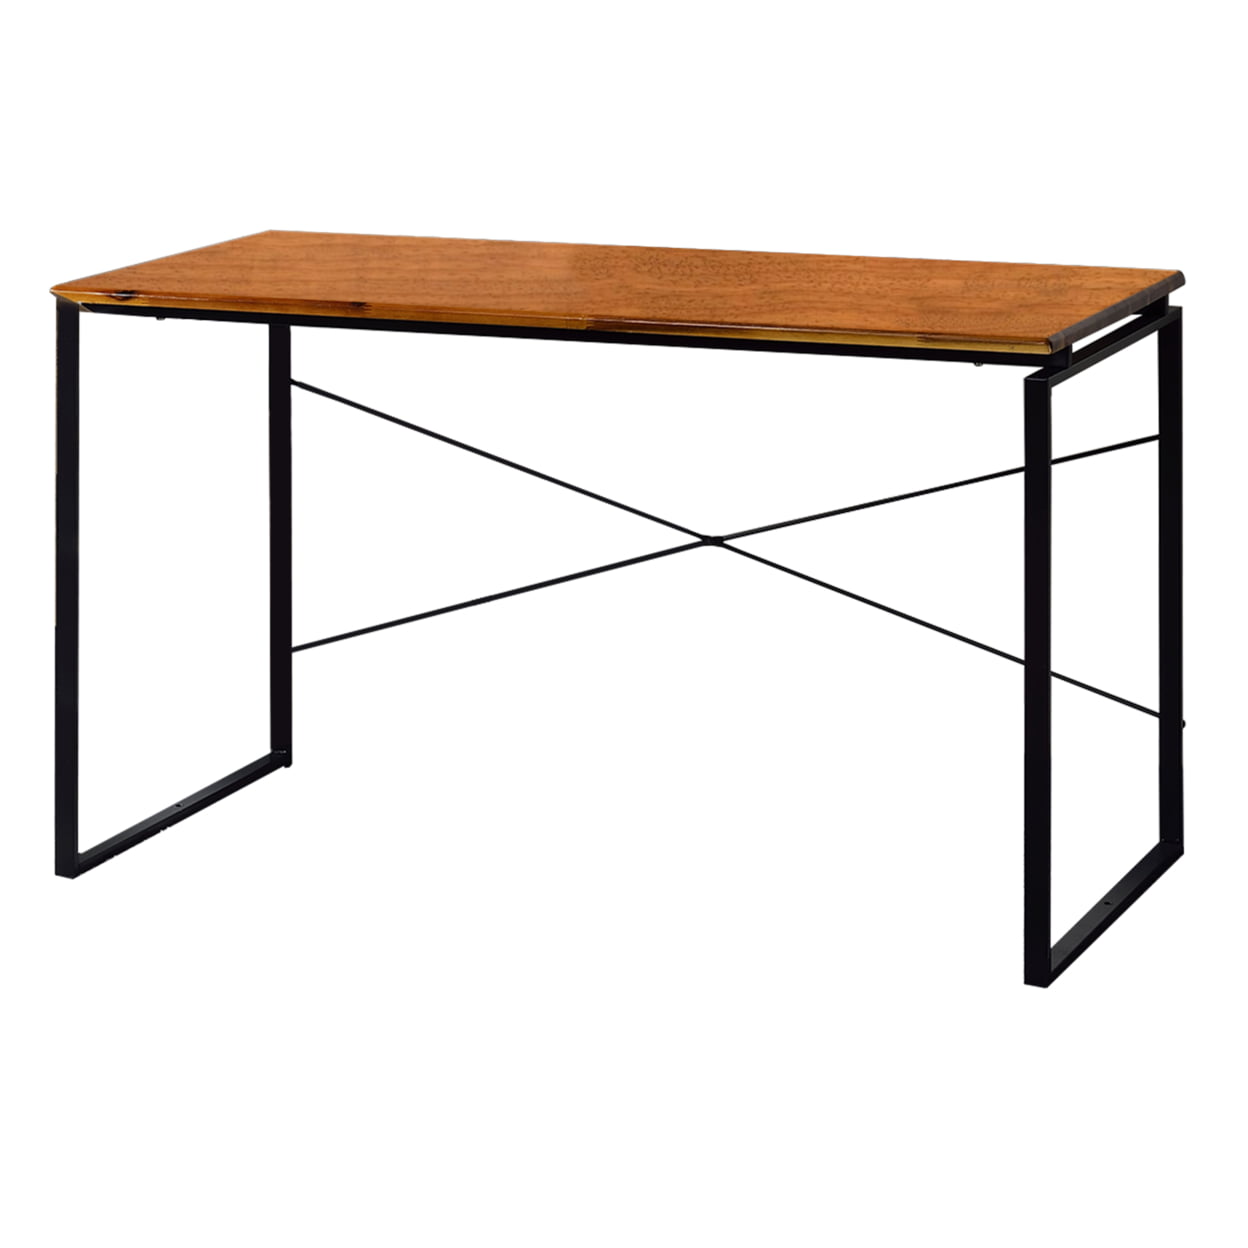 Bm209628 28 X 22 X 47 In. Sled Base Rectangular Table With X Shape Back & Wood Top, Brown & Black